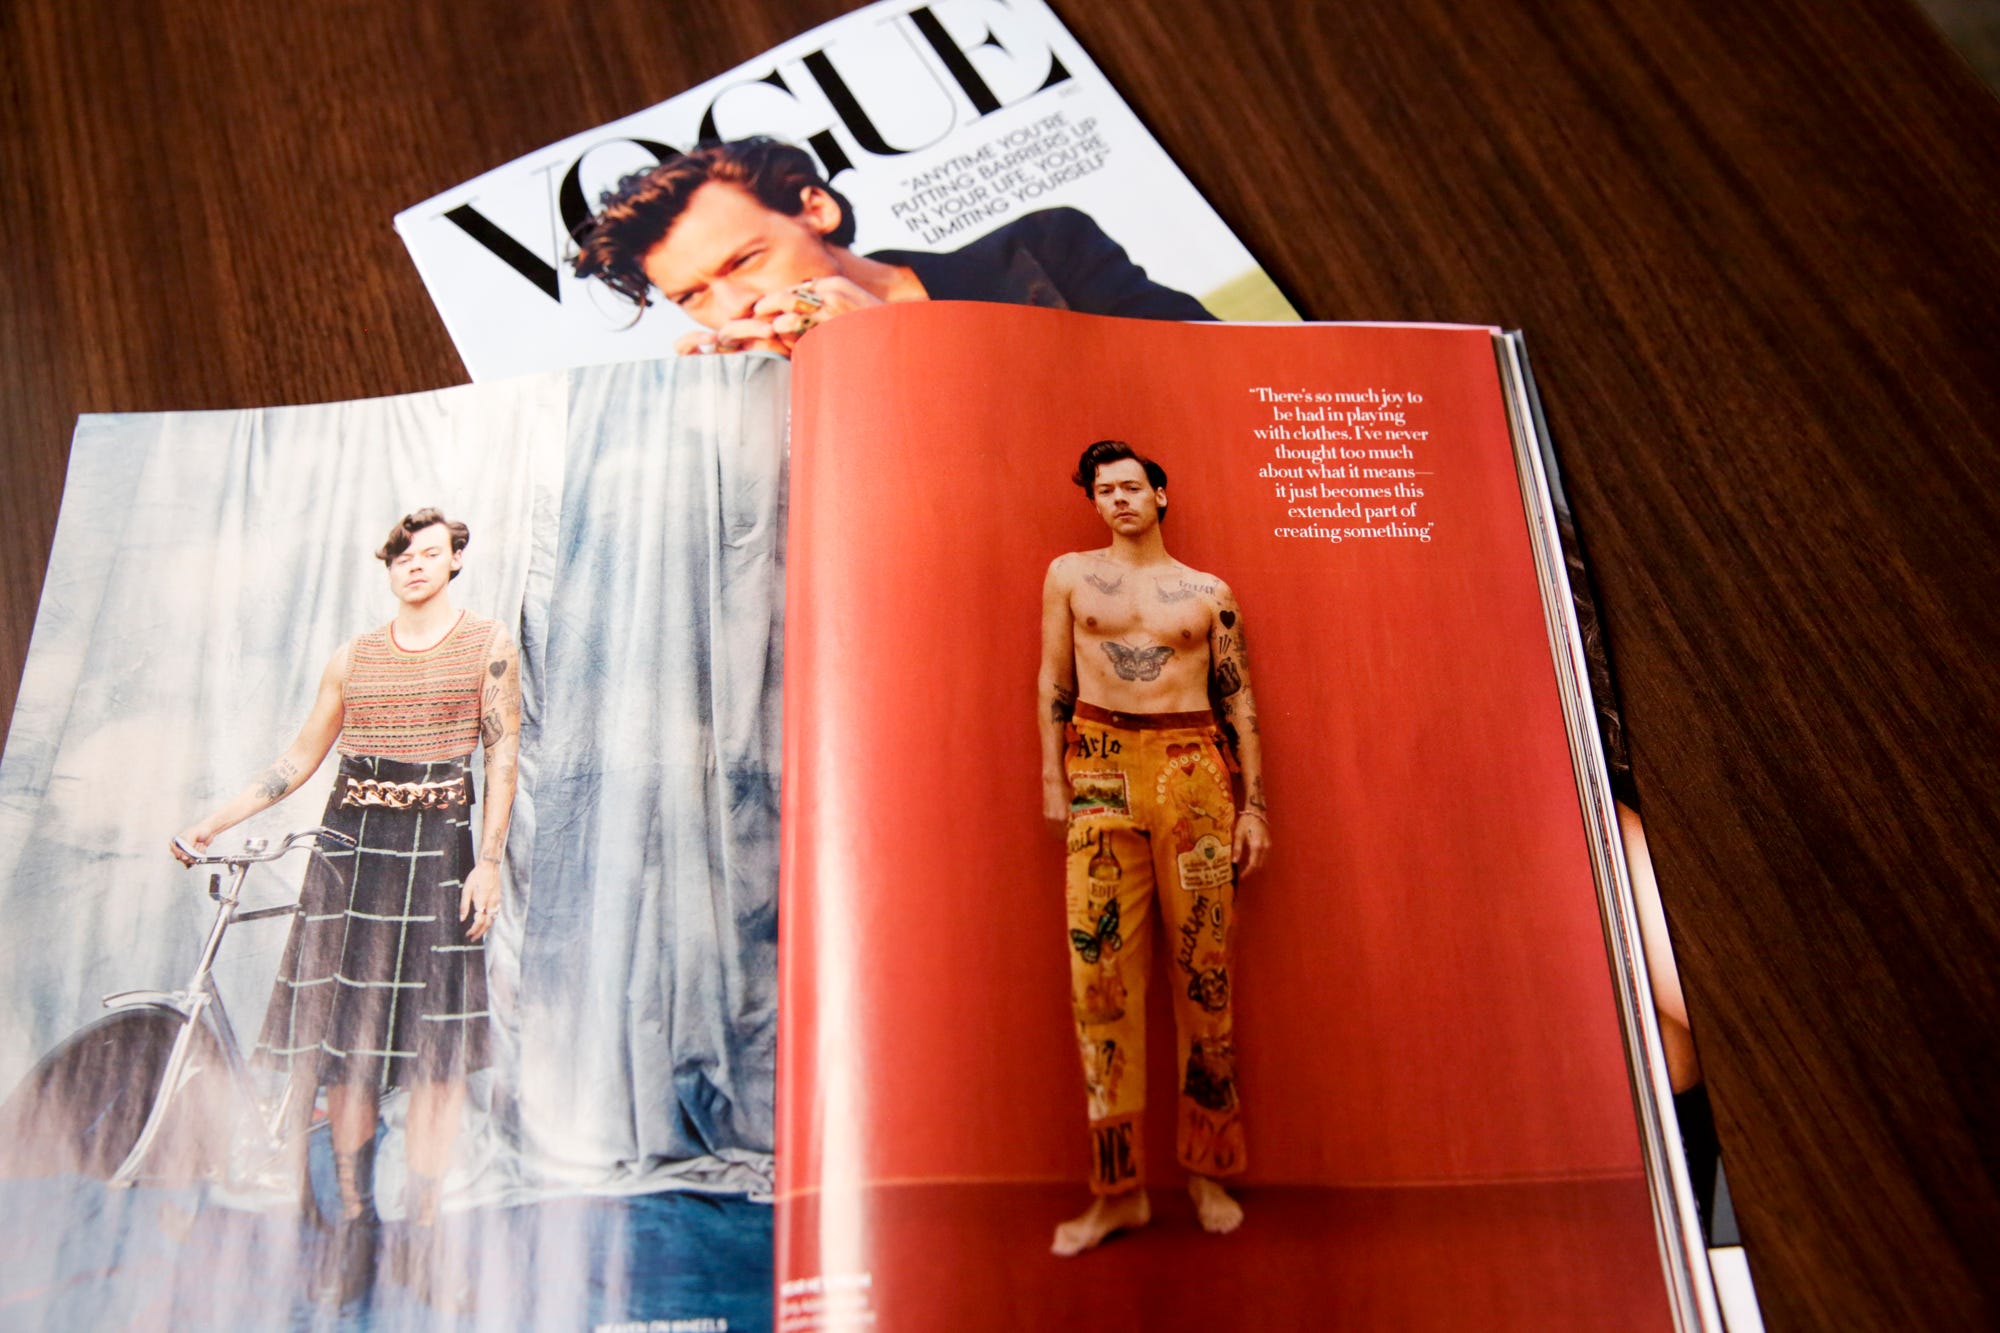 Senior Cords A Bygone Purdue Tradition Get Revival In Harry Styles Vogue Spread